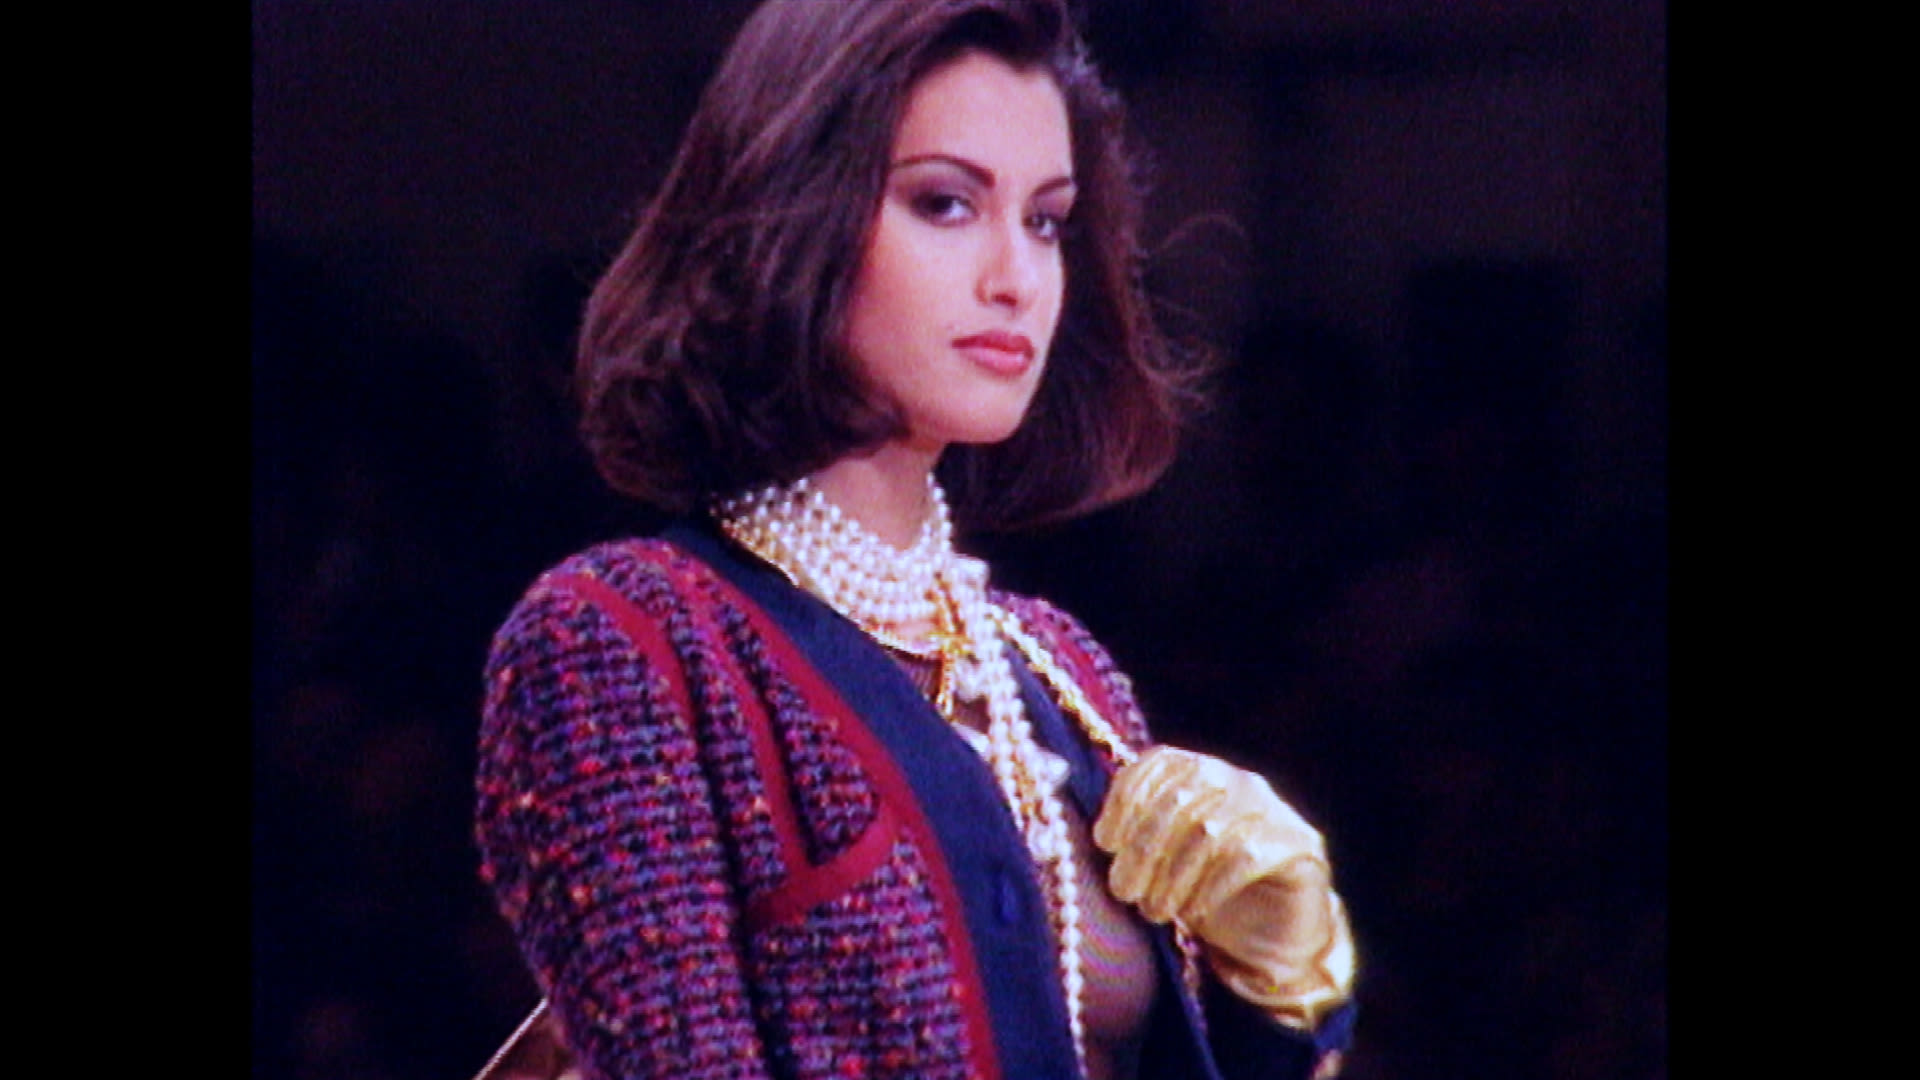 Chanel Brought Bikinis, Miniskirts and More Skin-Baring Looks Back